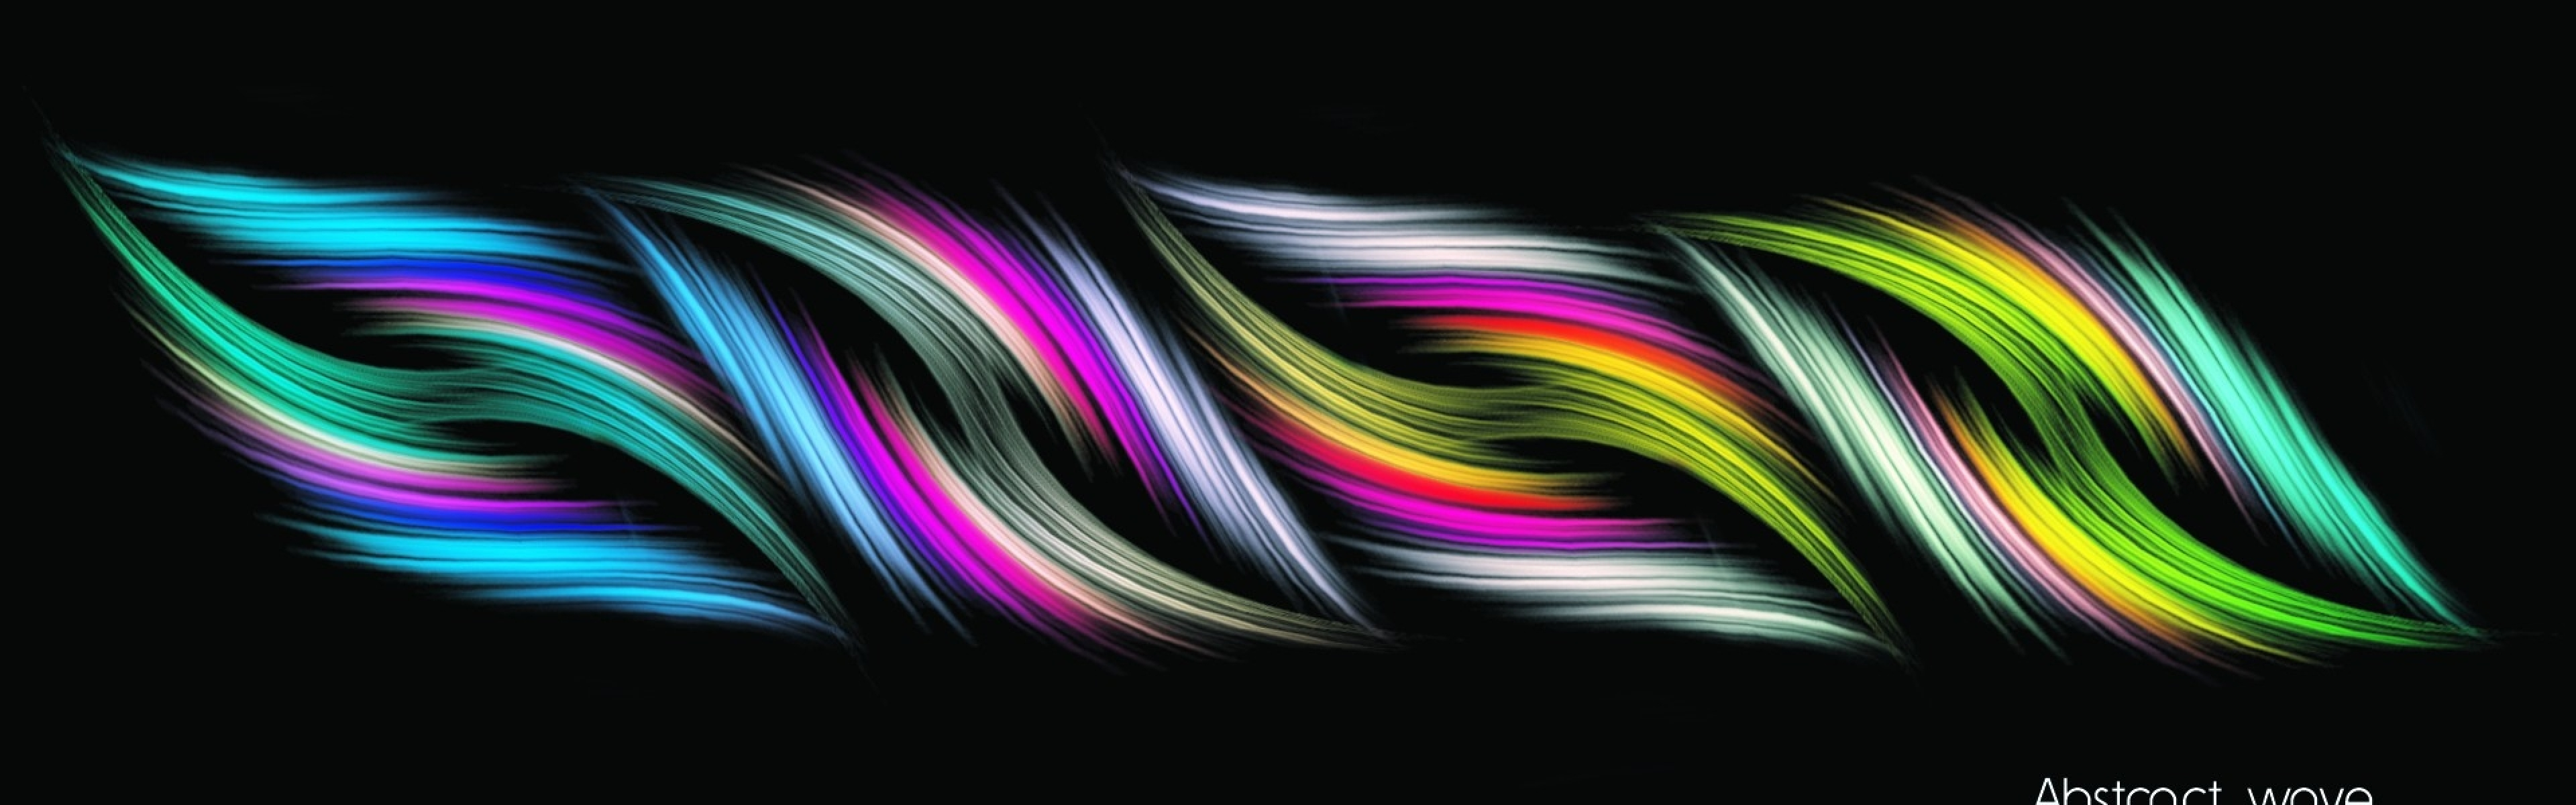 Colorful Neon Waves Wallpaper 3840x1200 (44)